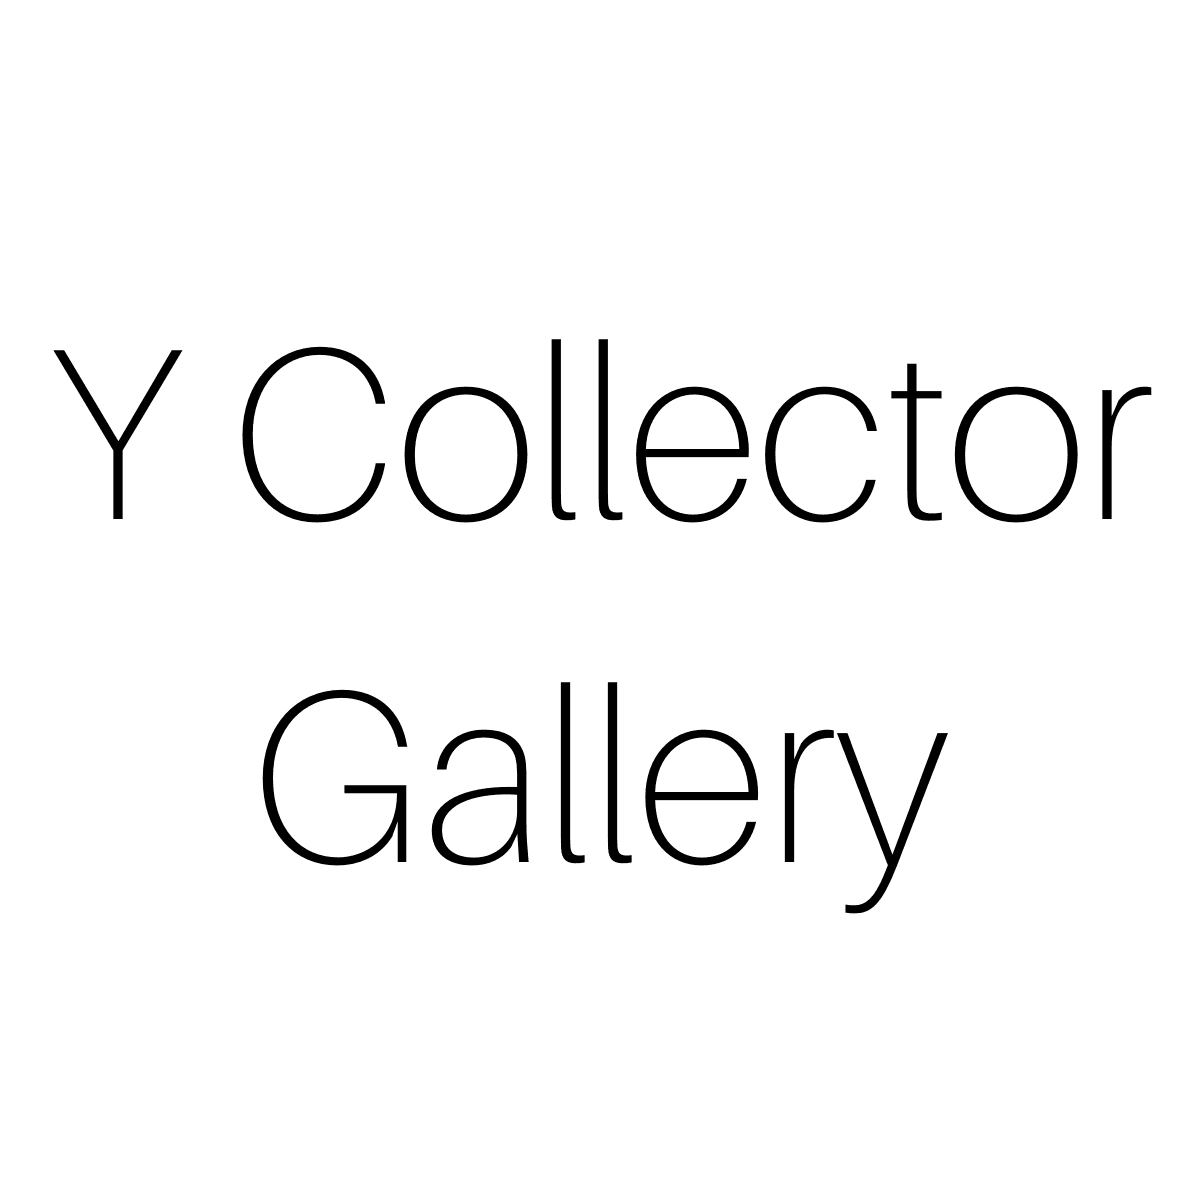 ycollector